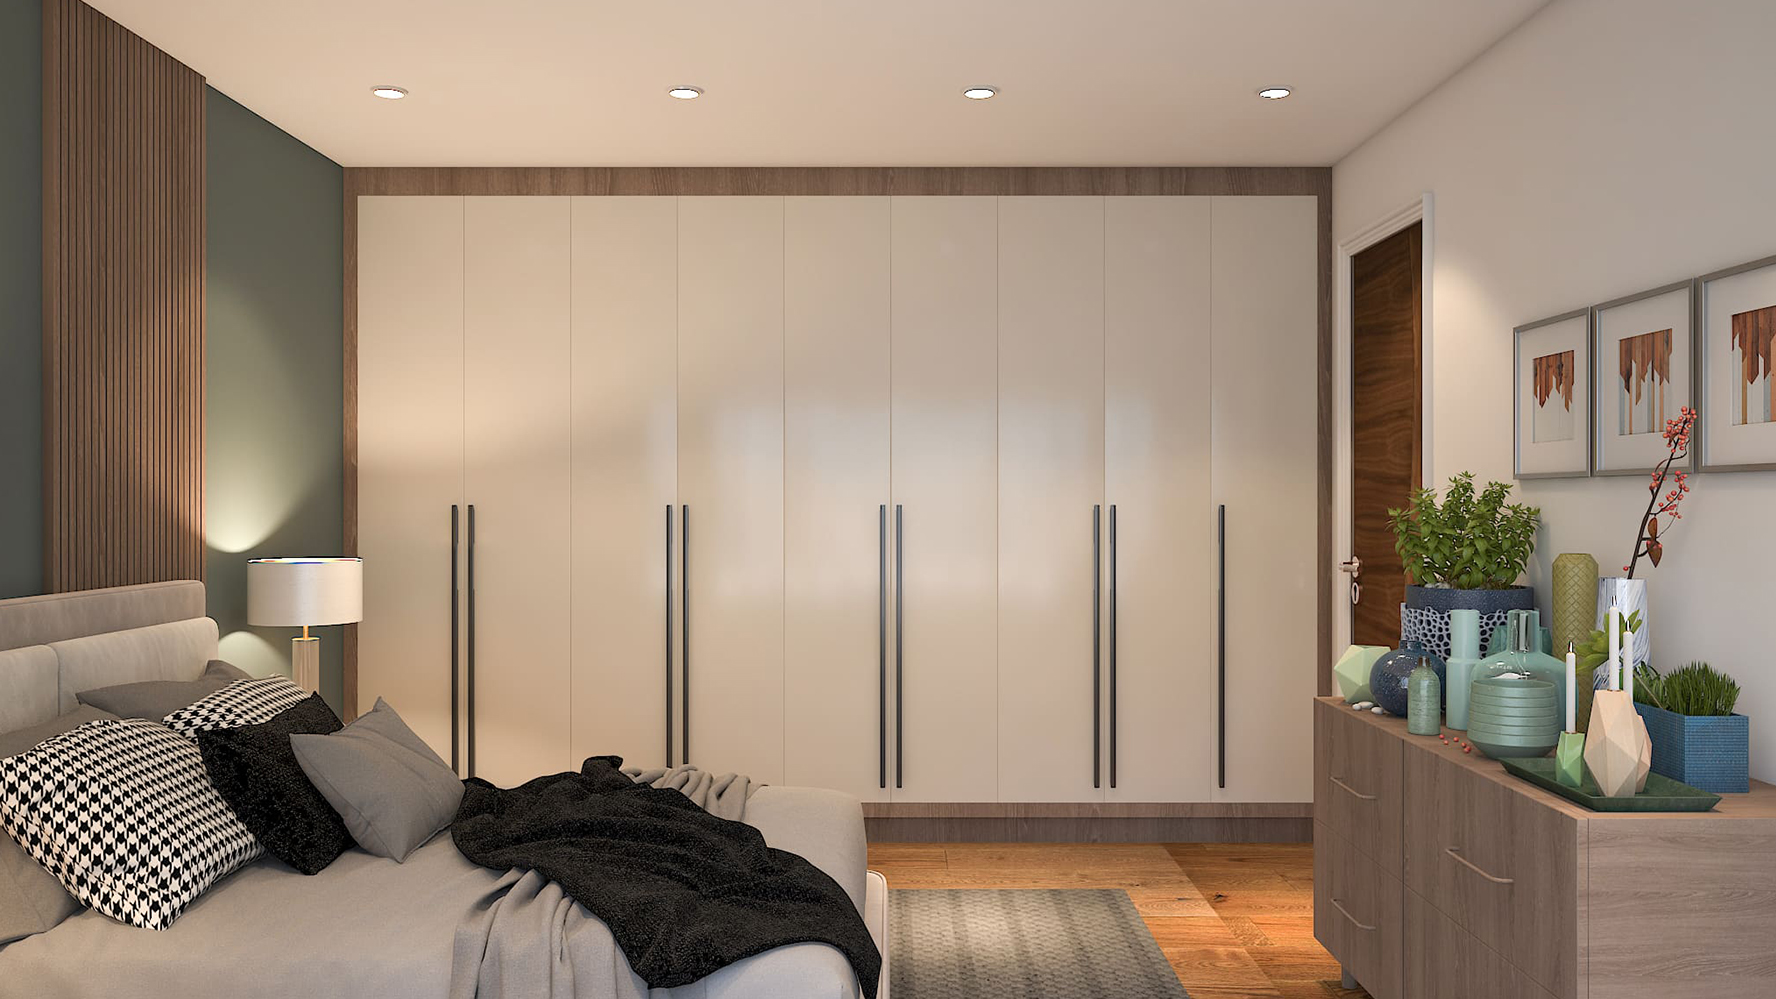 What Are the Different Types of Bedroom Wardrobes by TEL Kitchens?